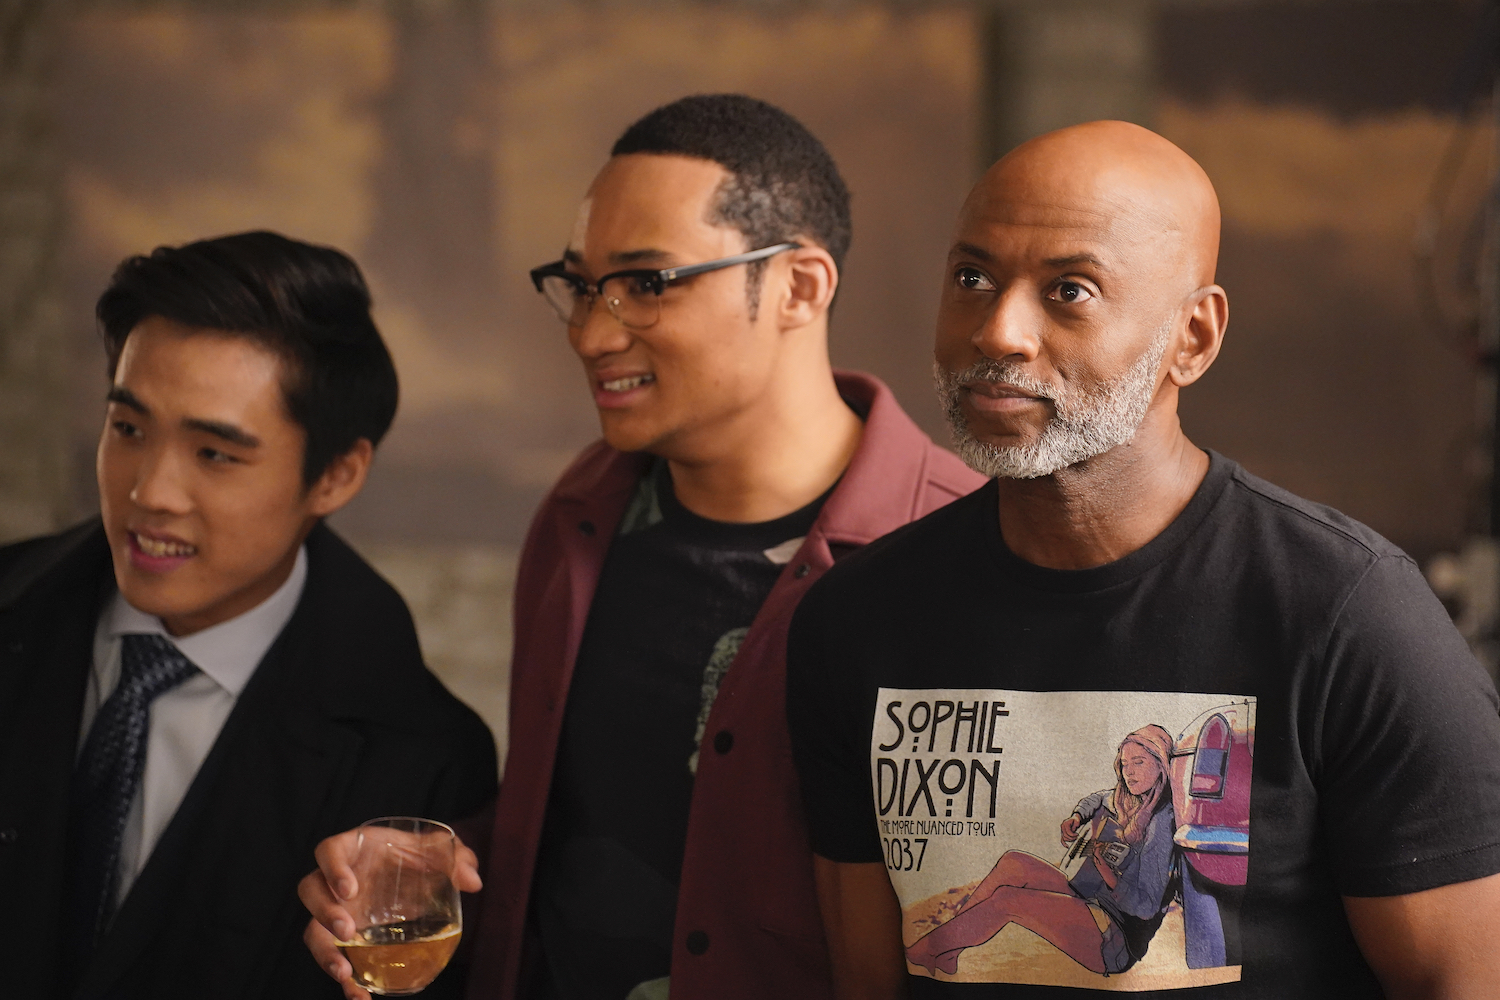 Lance Lim, Adam Swain, and Romany Malco in 'A Million Little Things'